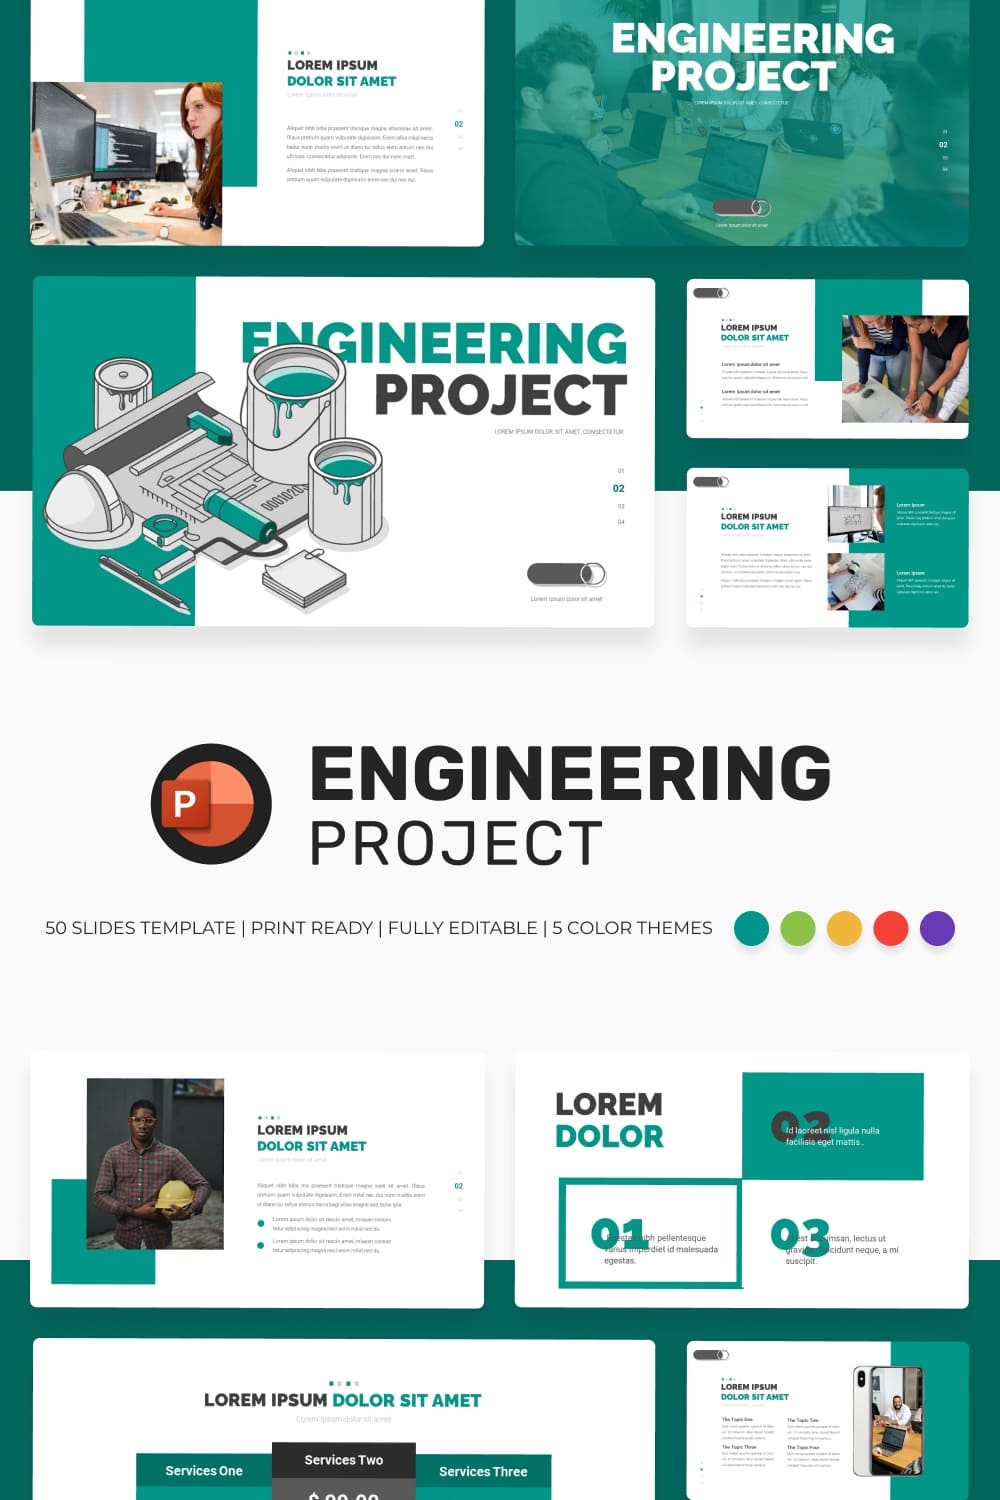 engineering project powerpoint template pinterest image.